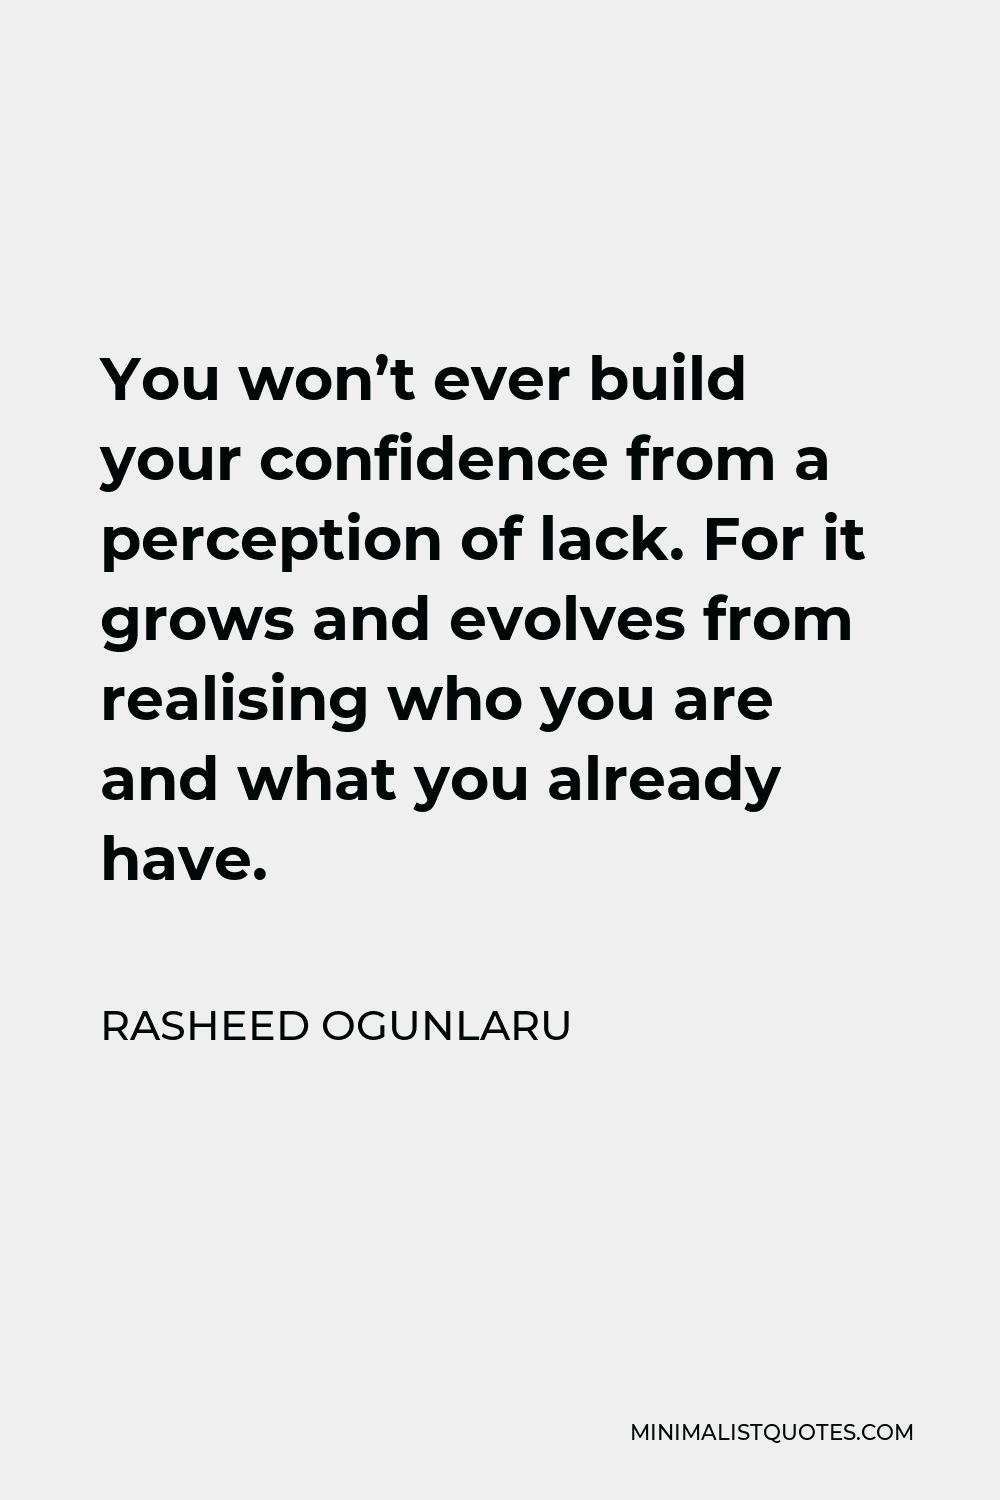 Rasheed Ogunlaru Quote - You won’t ever build your confidence from a perception of lack. For it grows and evolves from realising who you are and what you already have.